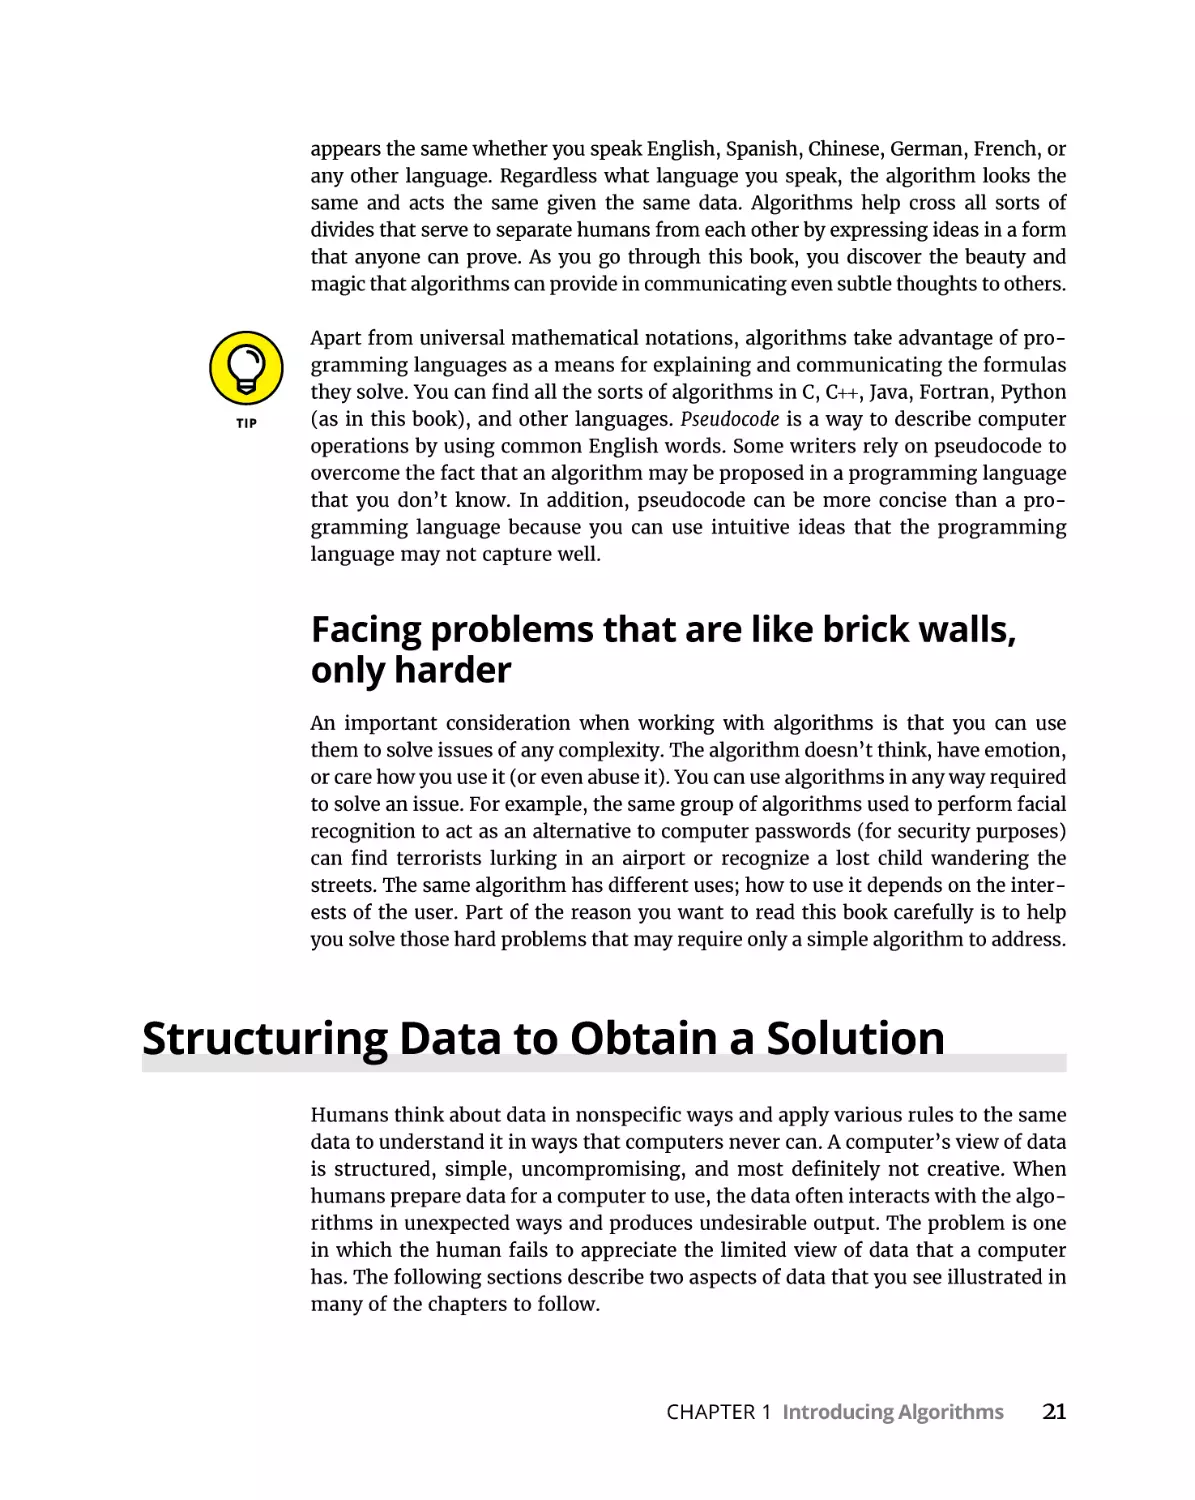 Facing problems that are like brick walls, only harder
Structuring Data to Obtain a Solution